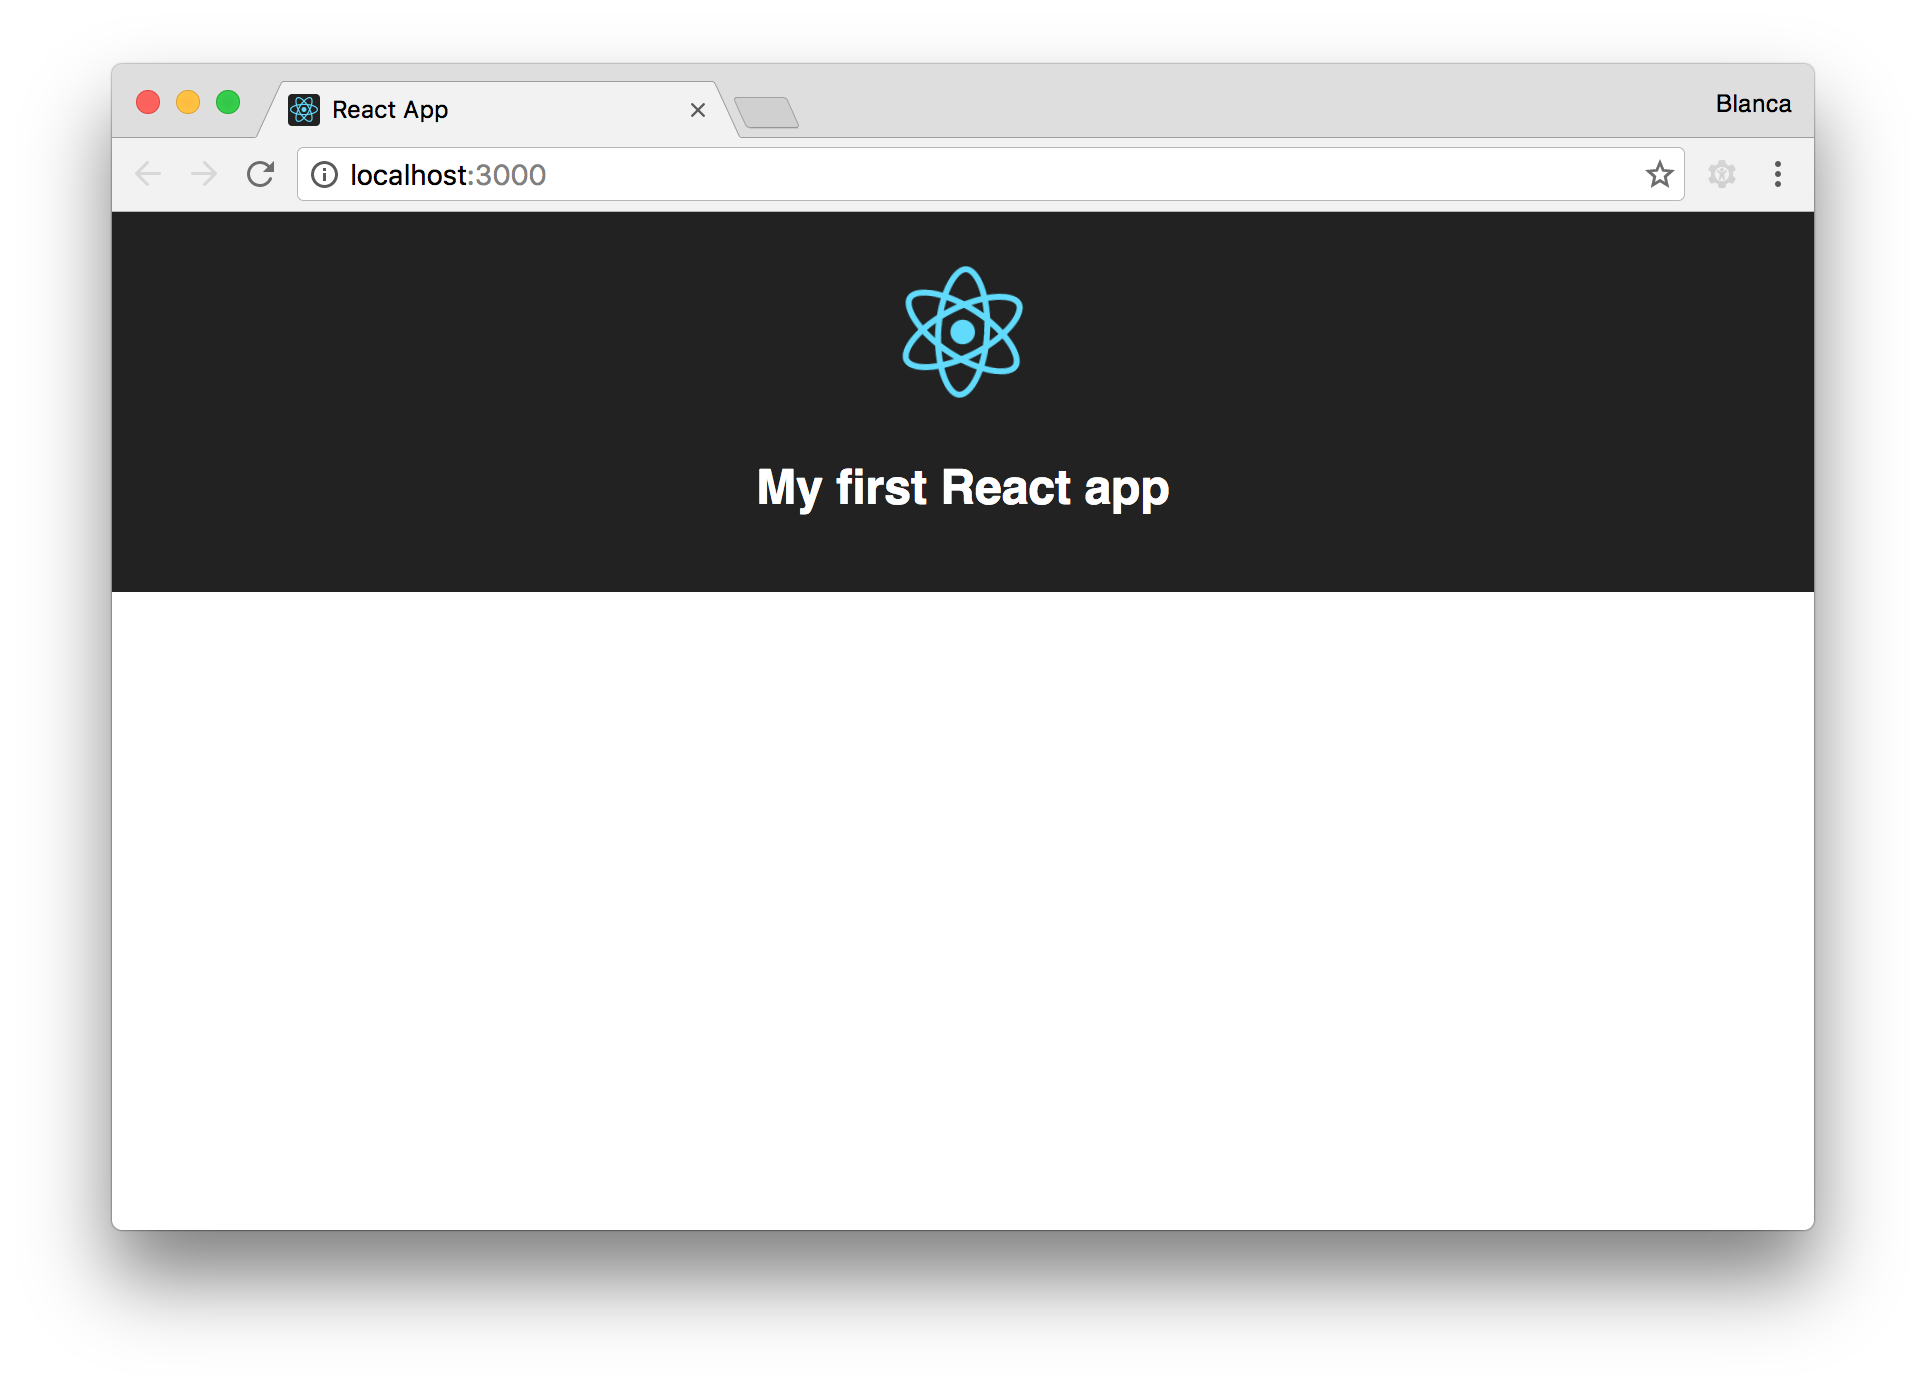 Our firs React app